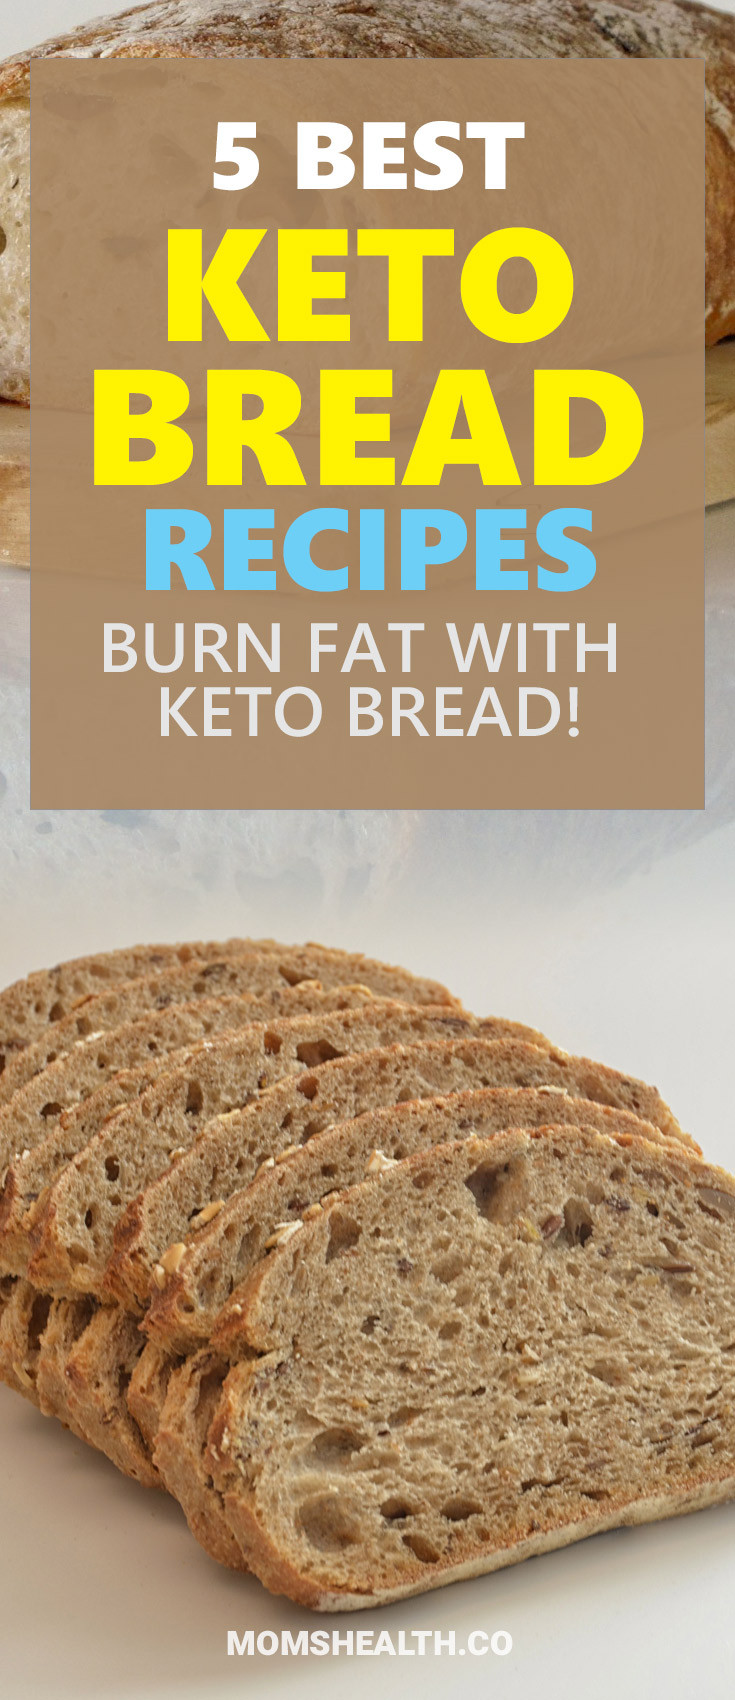 Keto Friendly Bread
 5 Best Keto Bread Recipes Easy and Quick Low Carb Bread